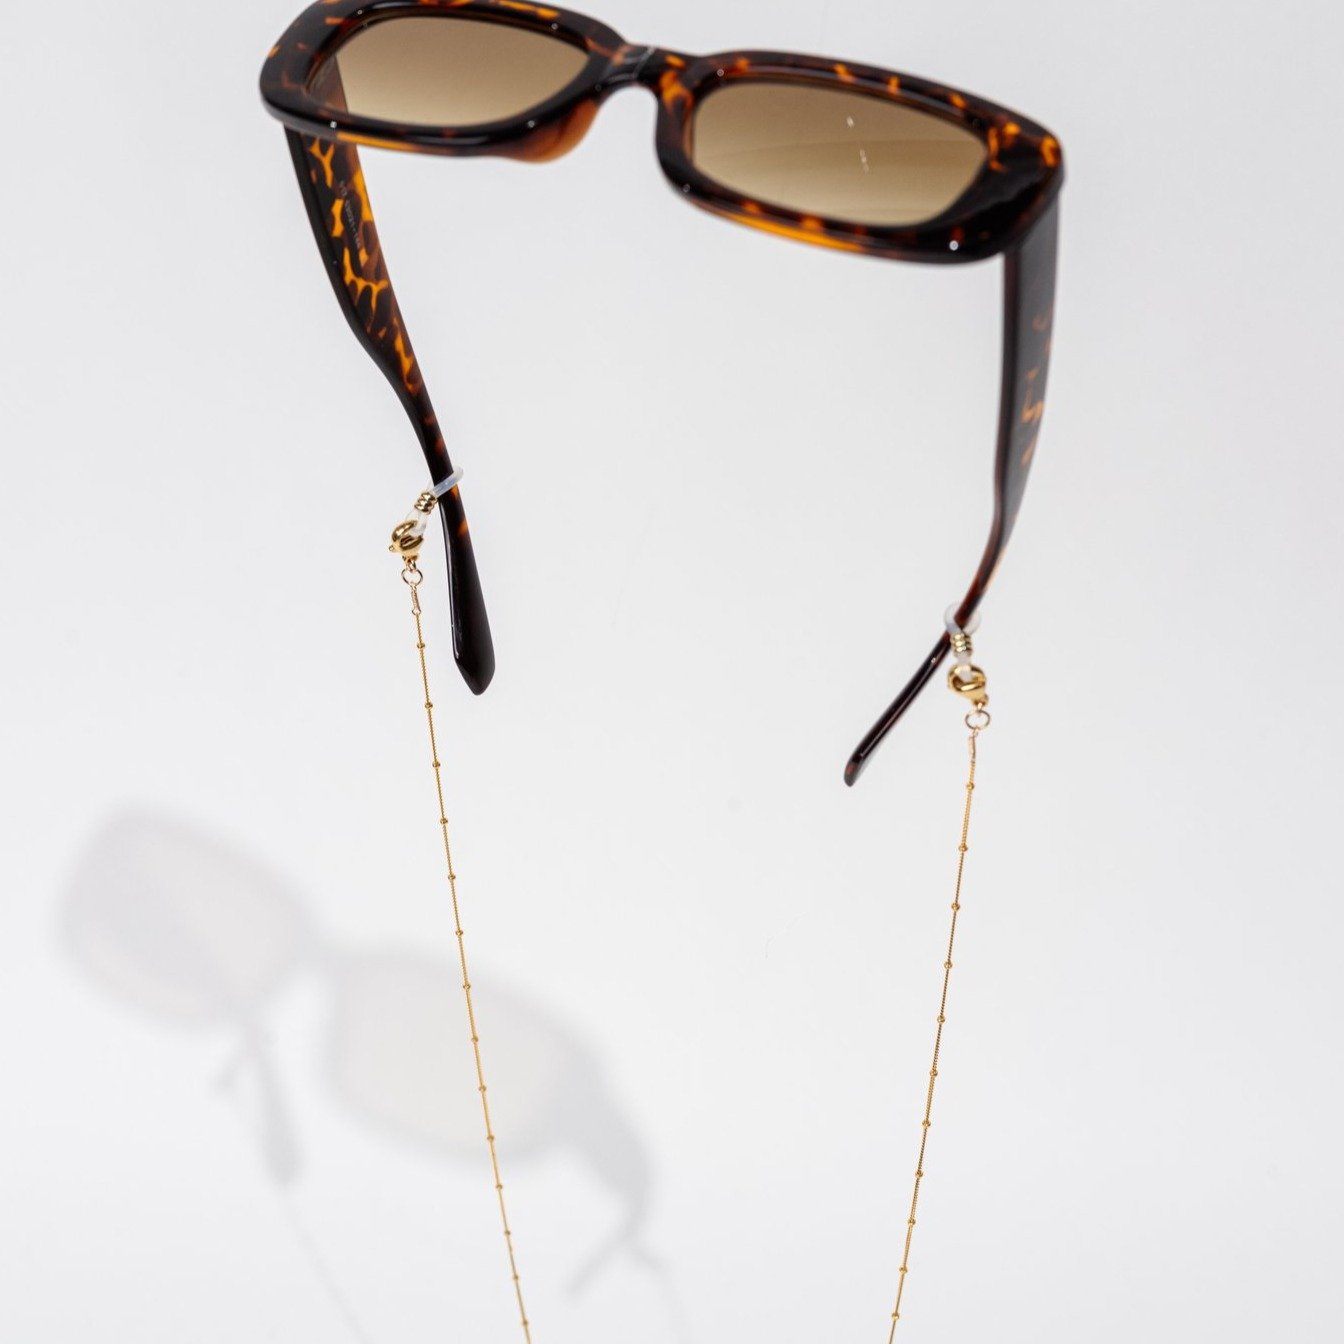 Beaded Glasses Chains From Jo James Jewellery - Made In Devon